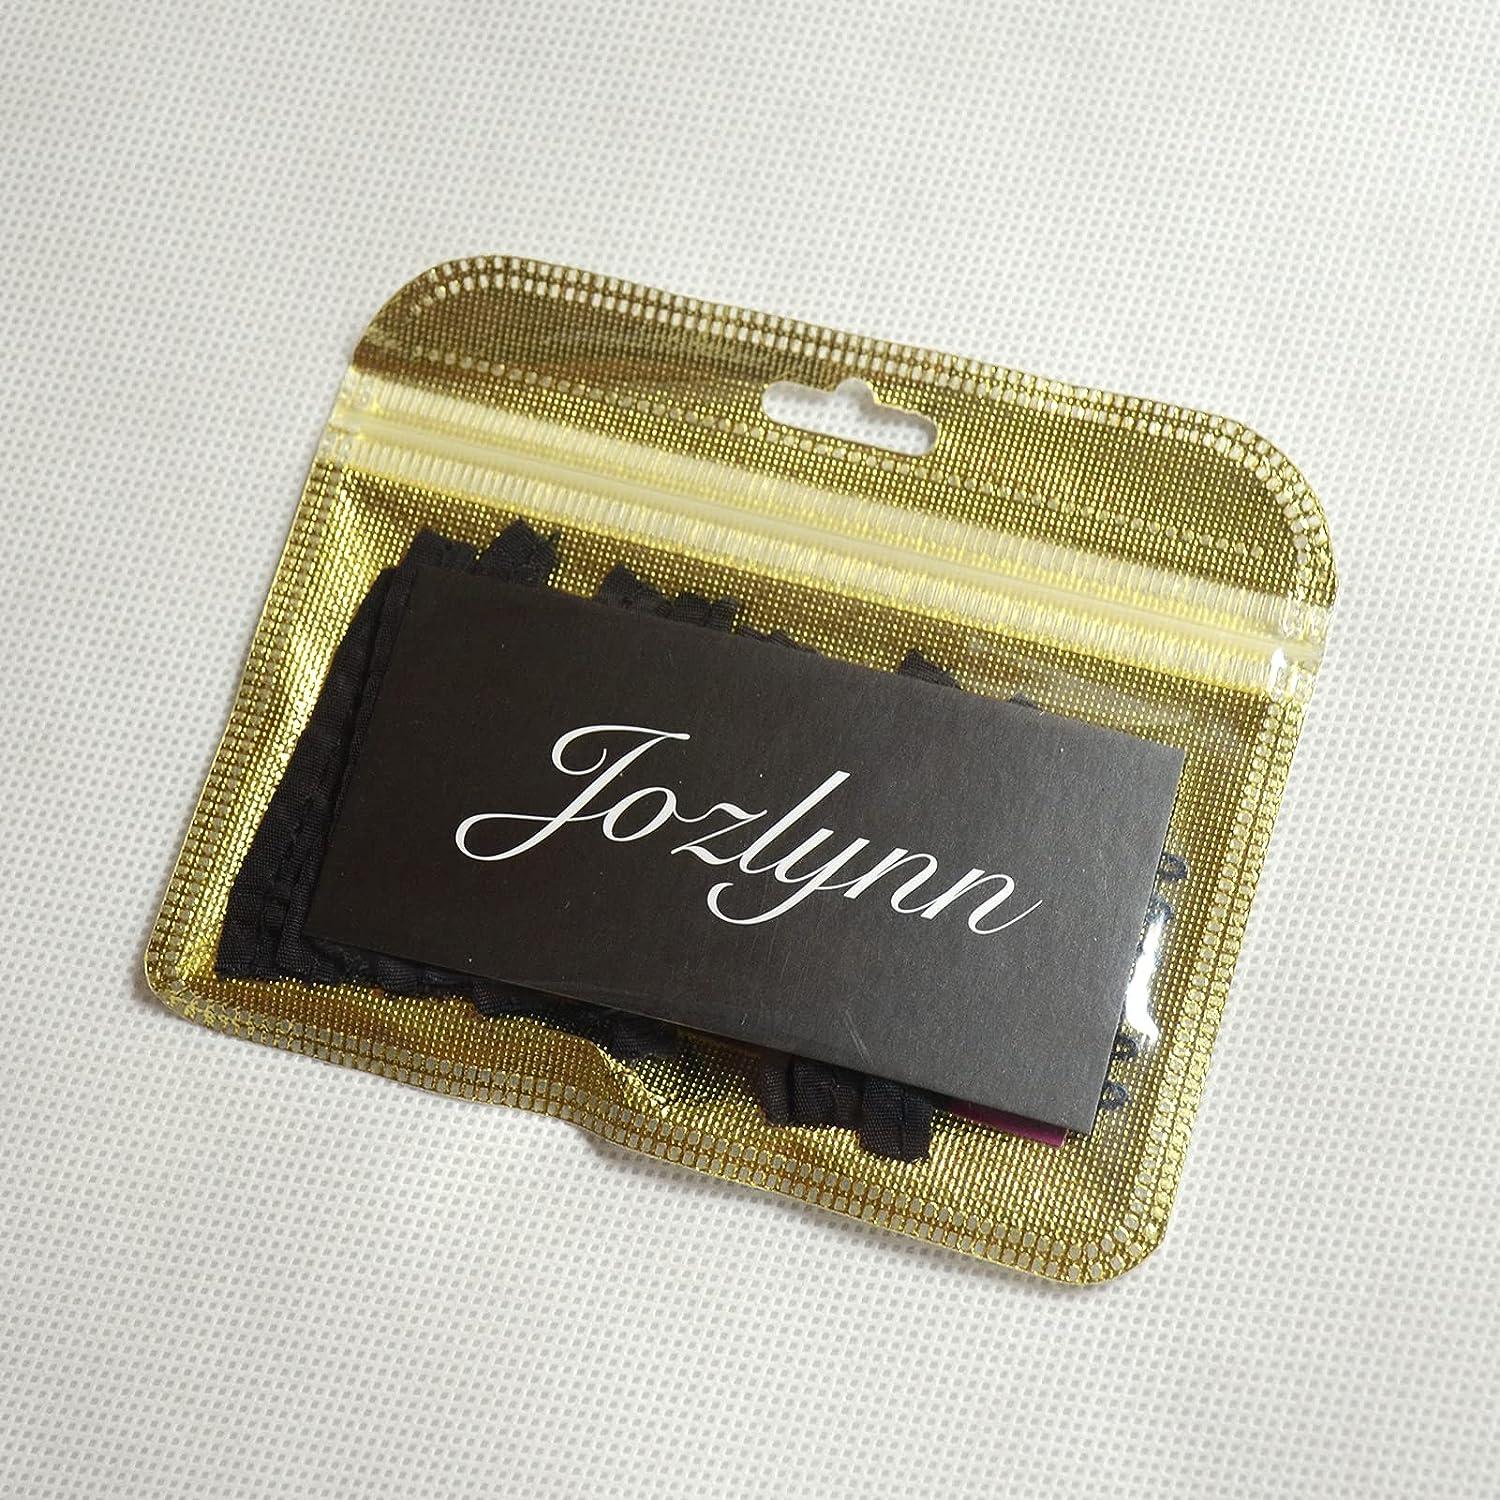 Jozlynn 12pcs Wig Combs for Making Wig,6 Teeth Wig Clips Stell Tooth For  Hairpiece Caps DIY (12 pcs, Black)